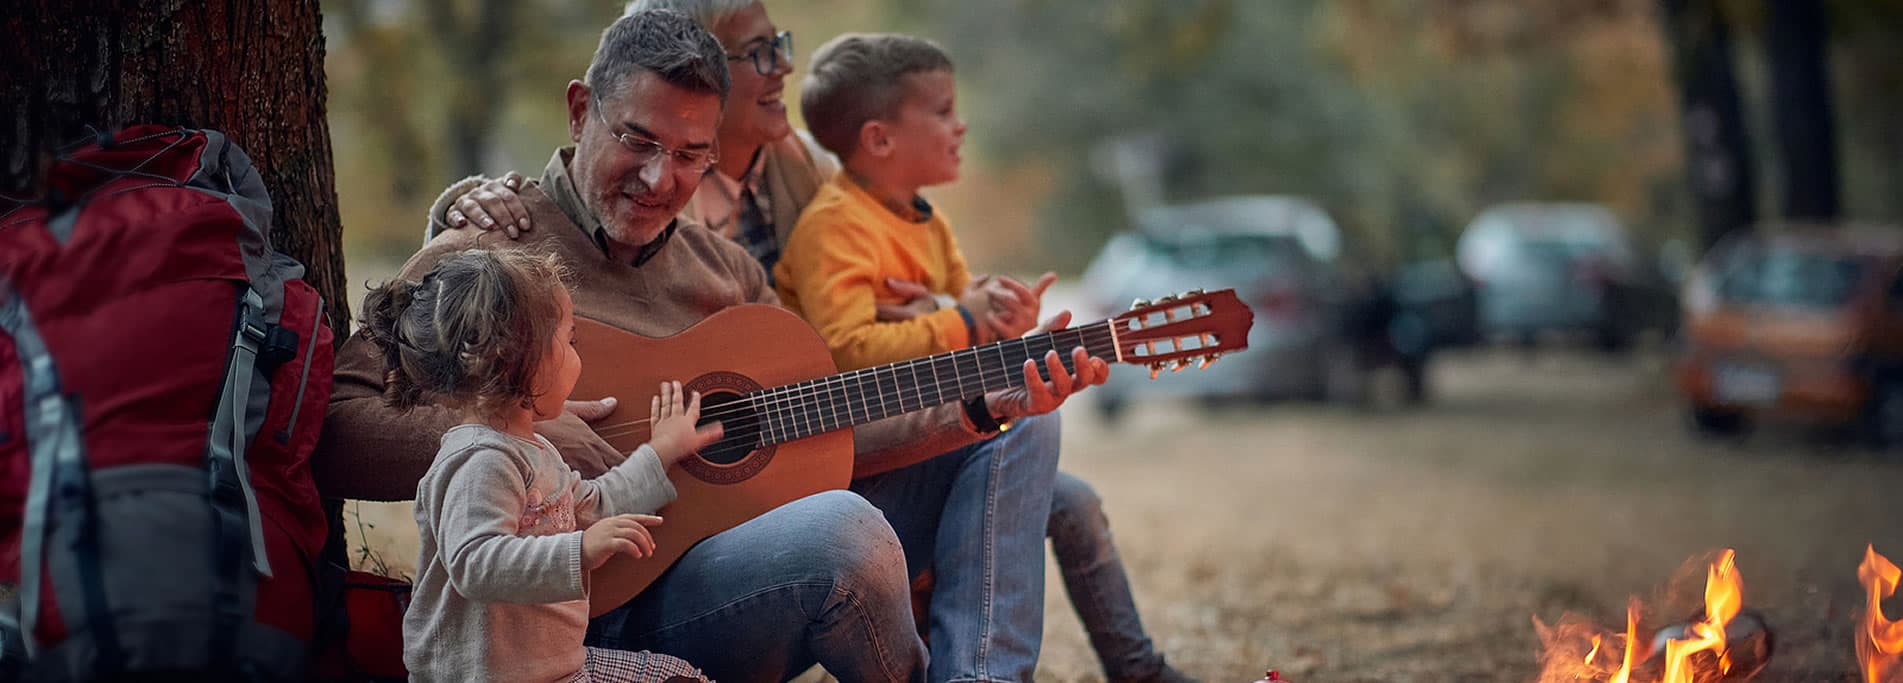 How to invest for retirement, grandparents enjoying grandchildren around a camp fire playing guitar.